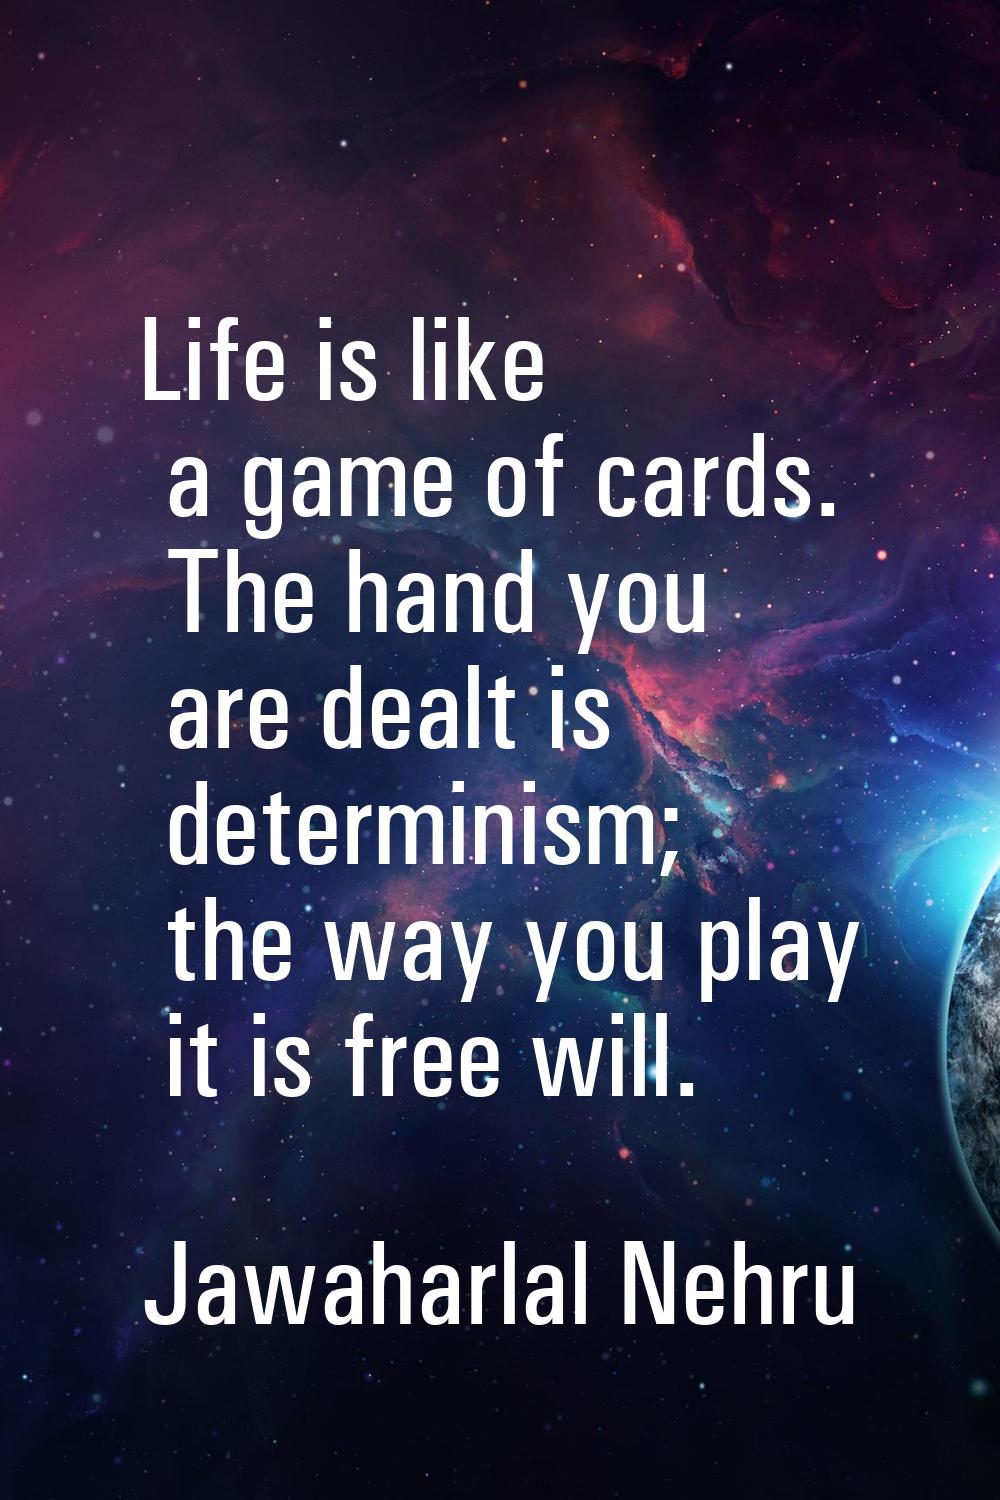 Life is like a game of cards. The hand you are dealt is determinism; the way you play it is free wi